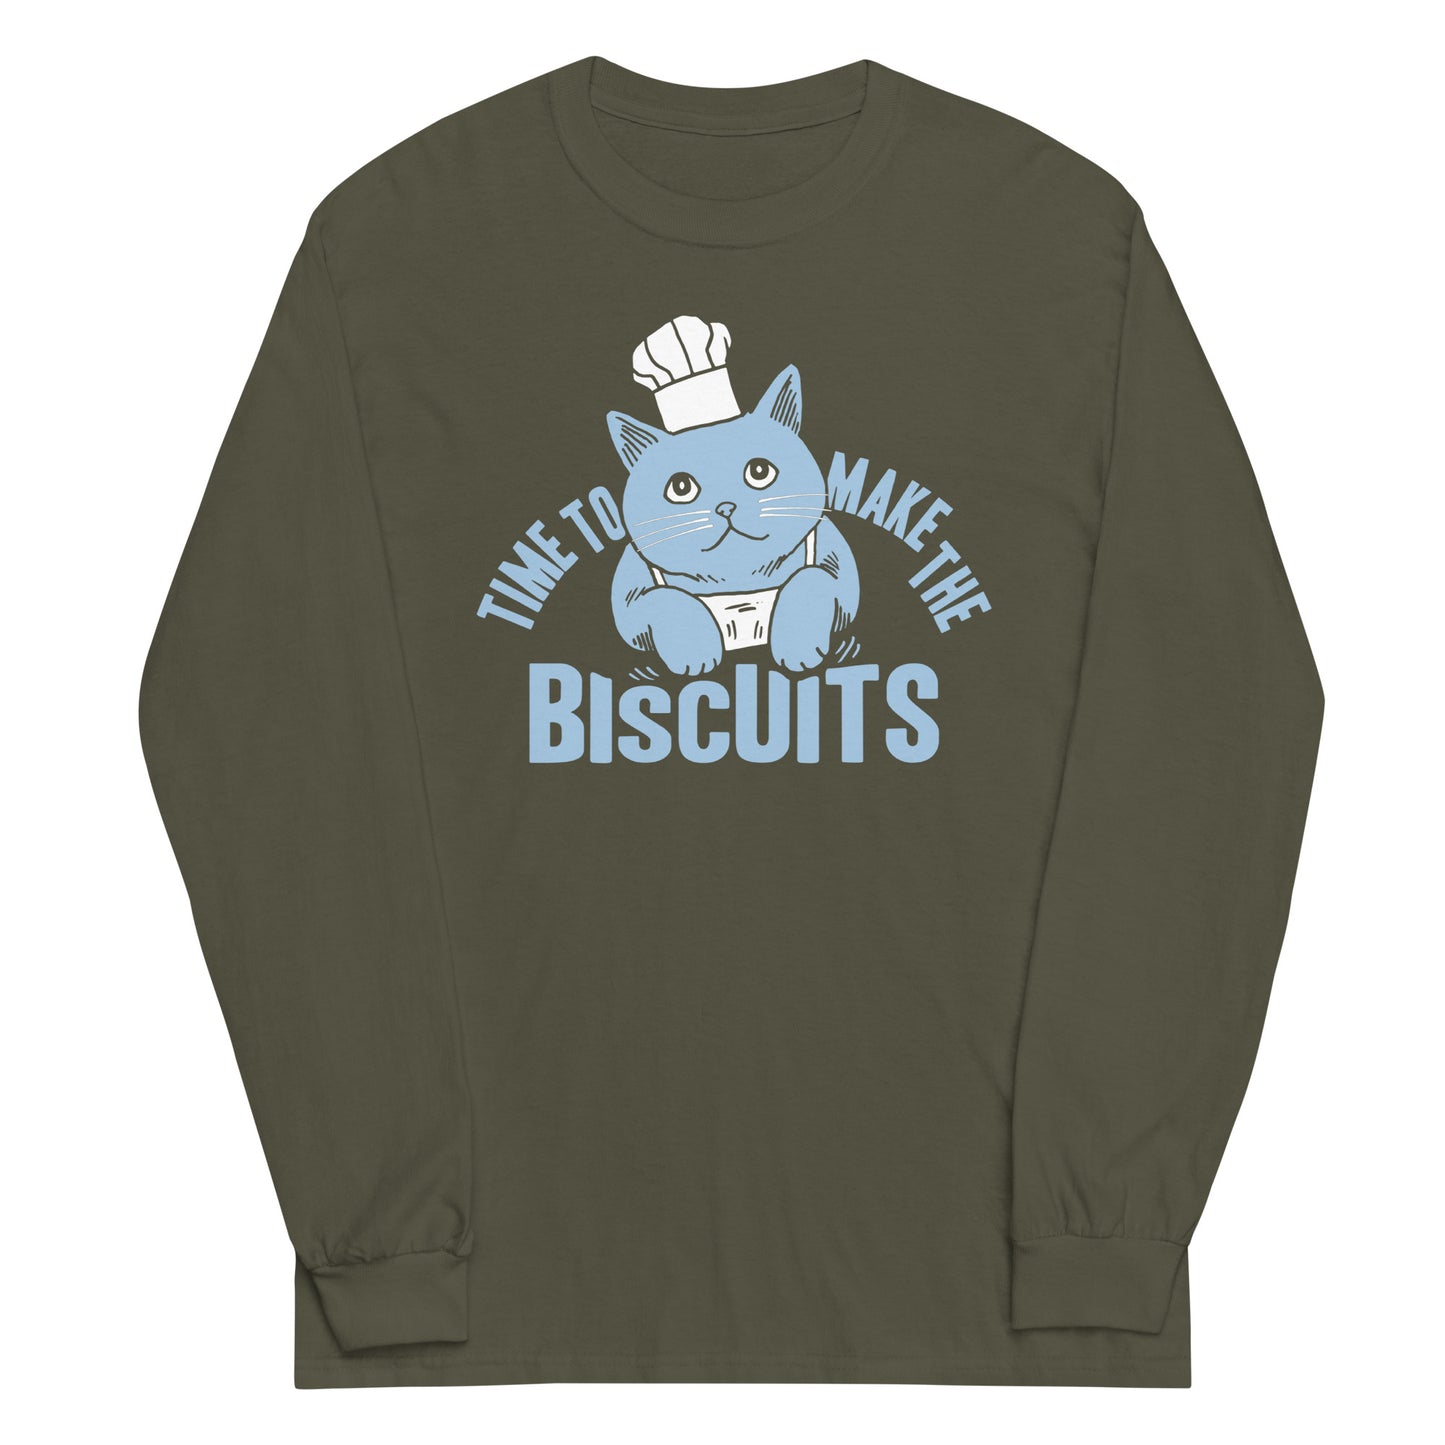 Time To Make The Biscuits Unisex Long Sleeve Tee